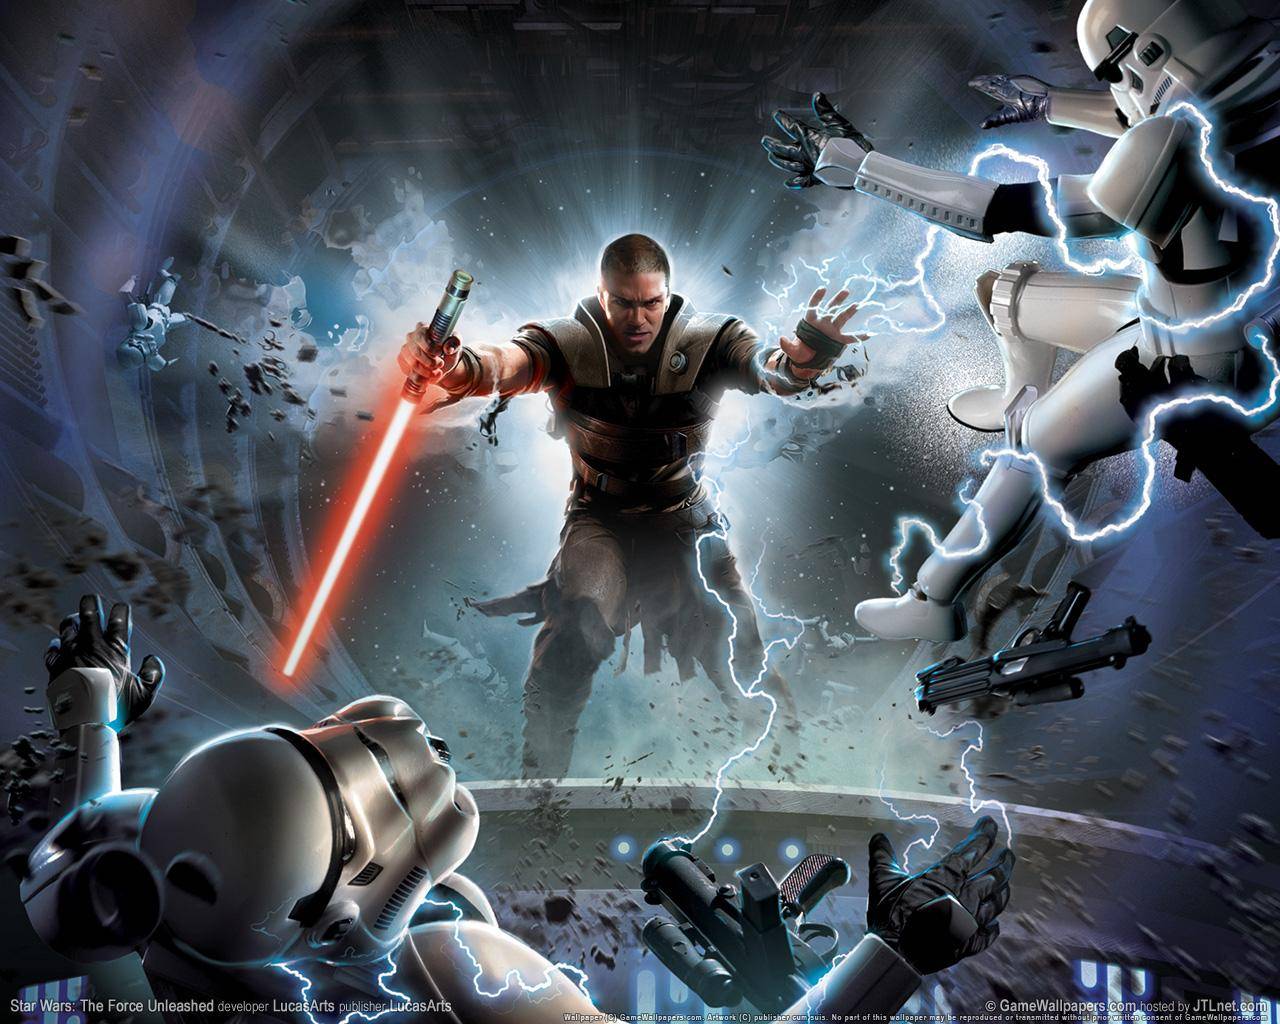 Is Star Wars The Force Unleashed 3 In Development